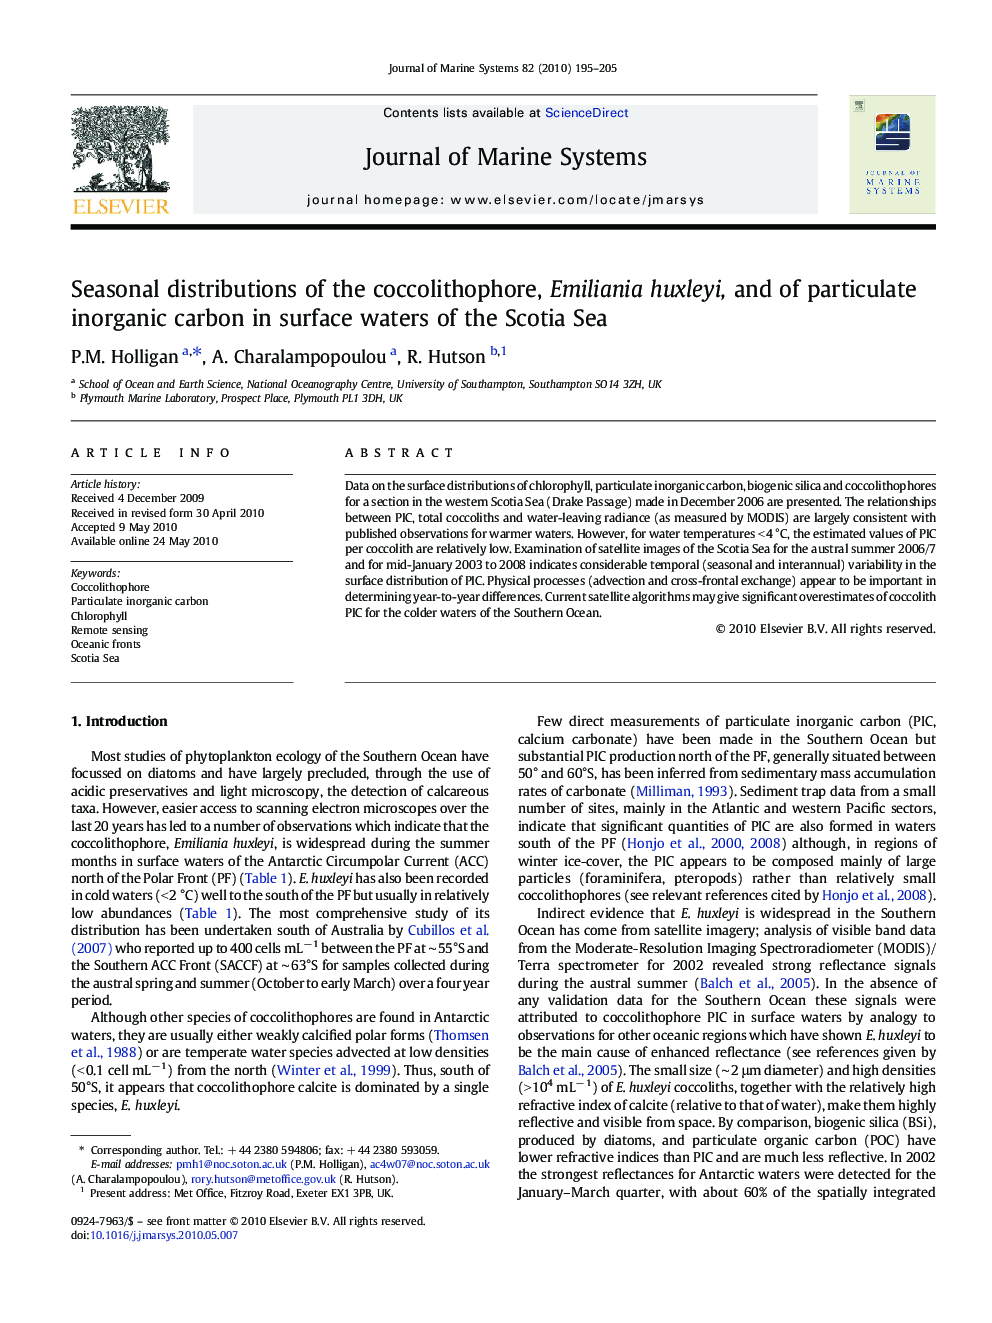 Seasonal distributions of the coccolithophore, Emiliania huxleyi, and of particulate inorganic carbon in surface waters of the Scotia Sea